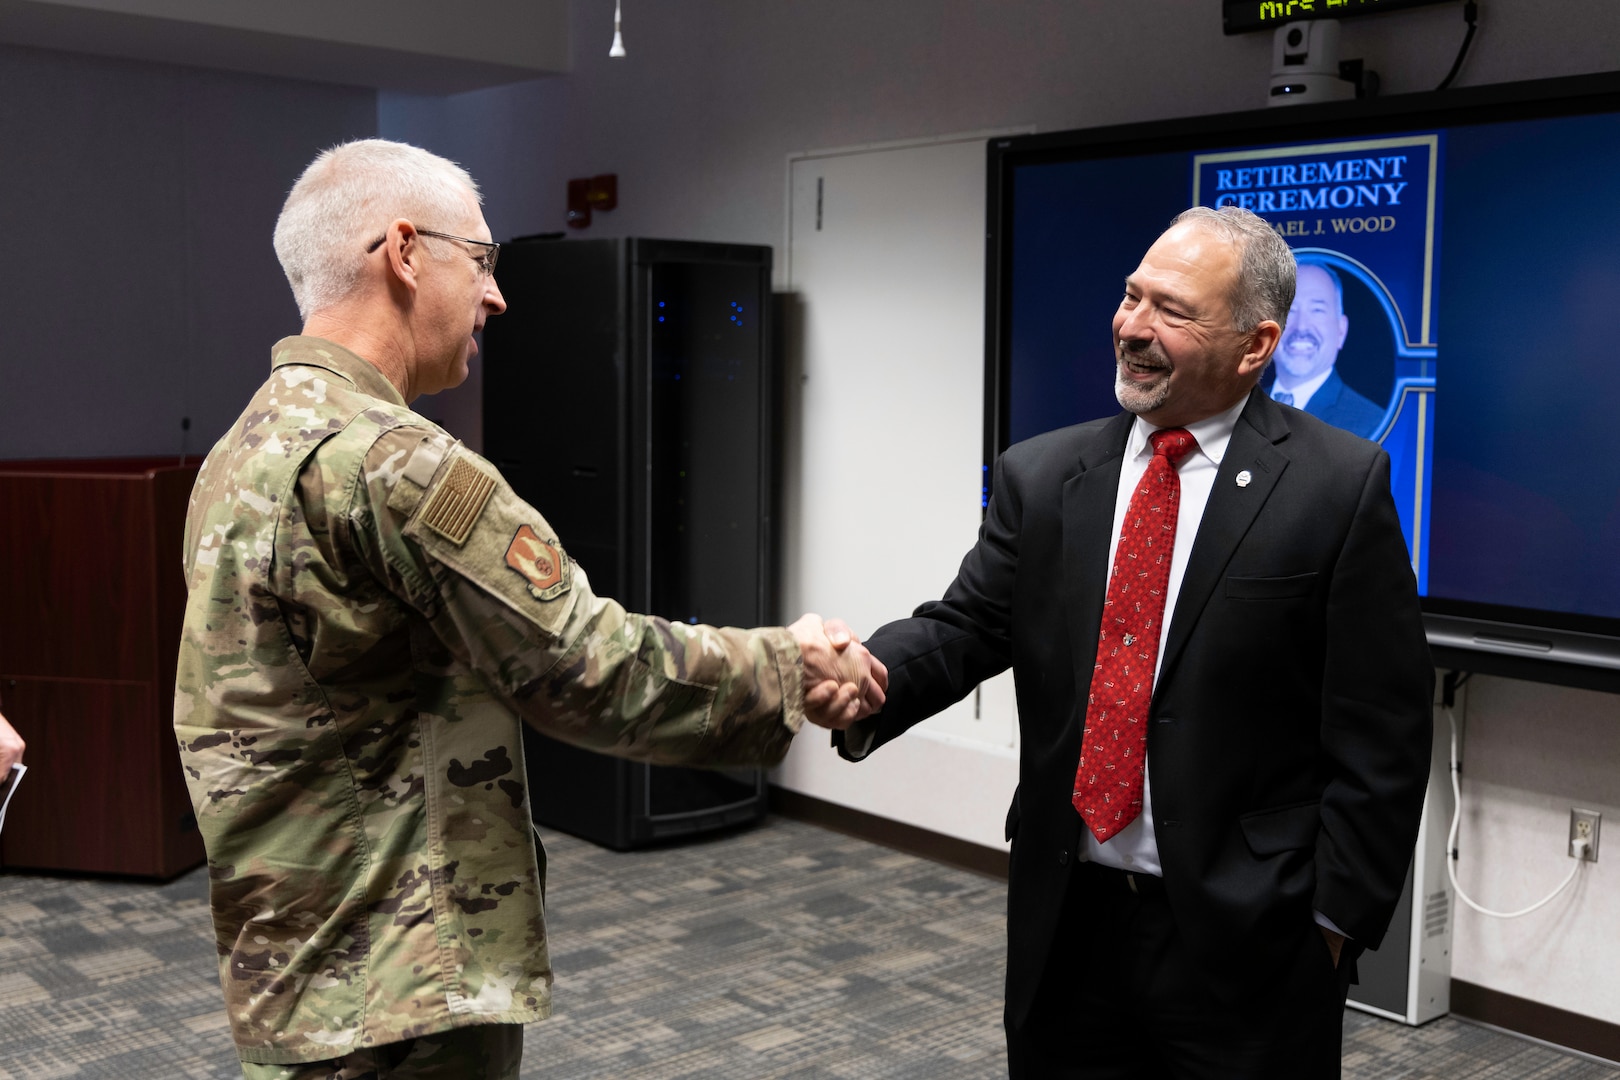 A light skinned man in a camouflage uniform with graying hair and glasses shakes the hand with another light skinned man with graying hair and beard wearing a dark suit with a red tie in a conference type room.